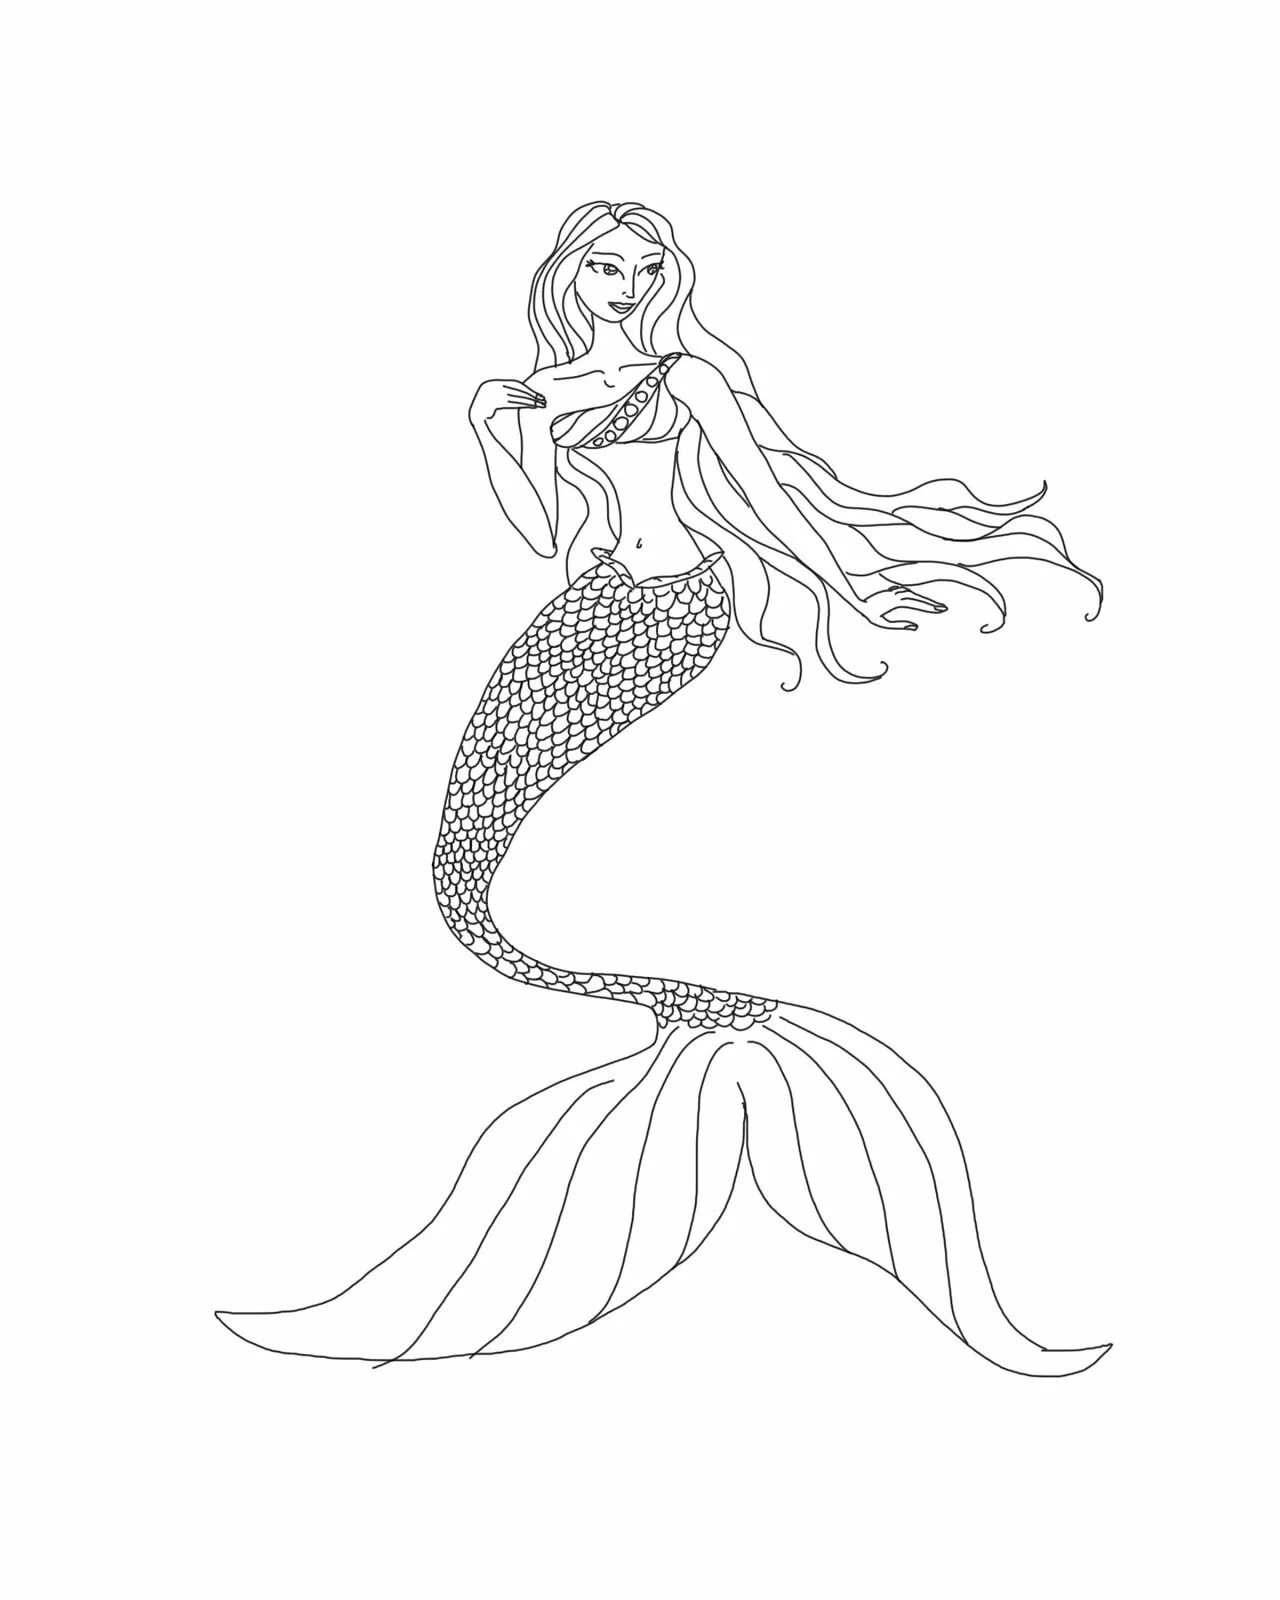 Glitter mermaid queen coloring page